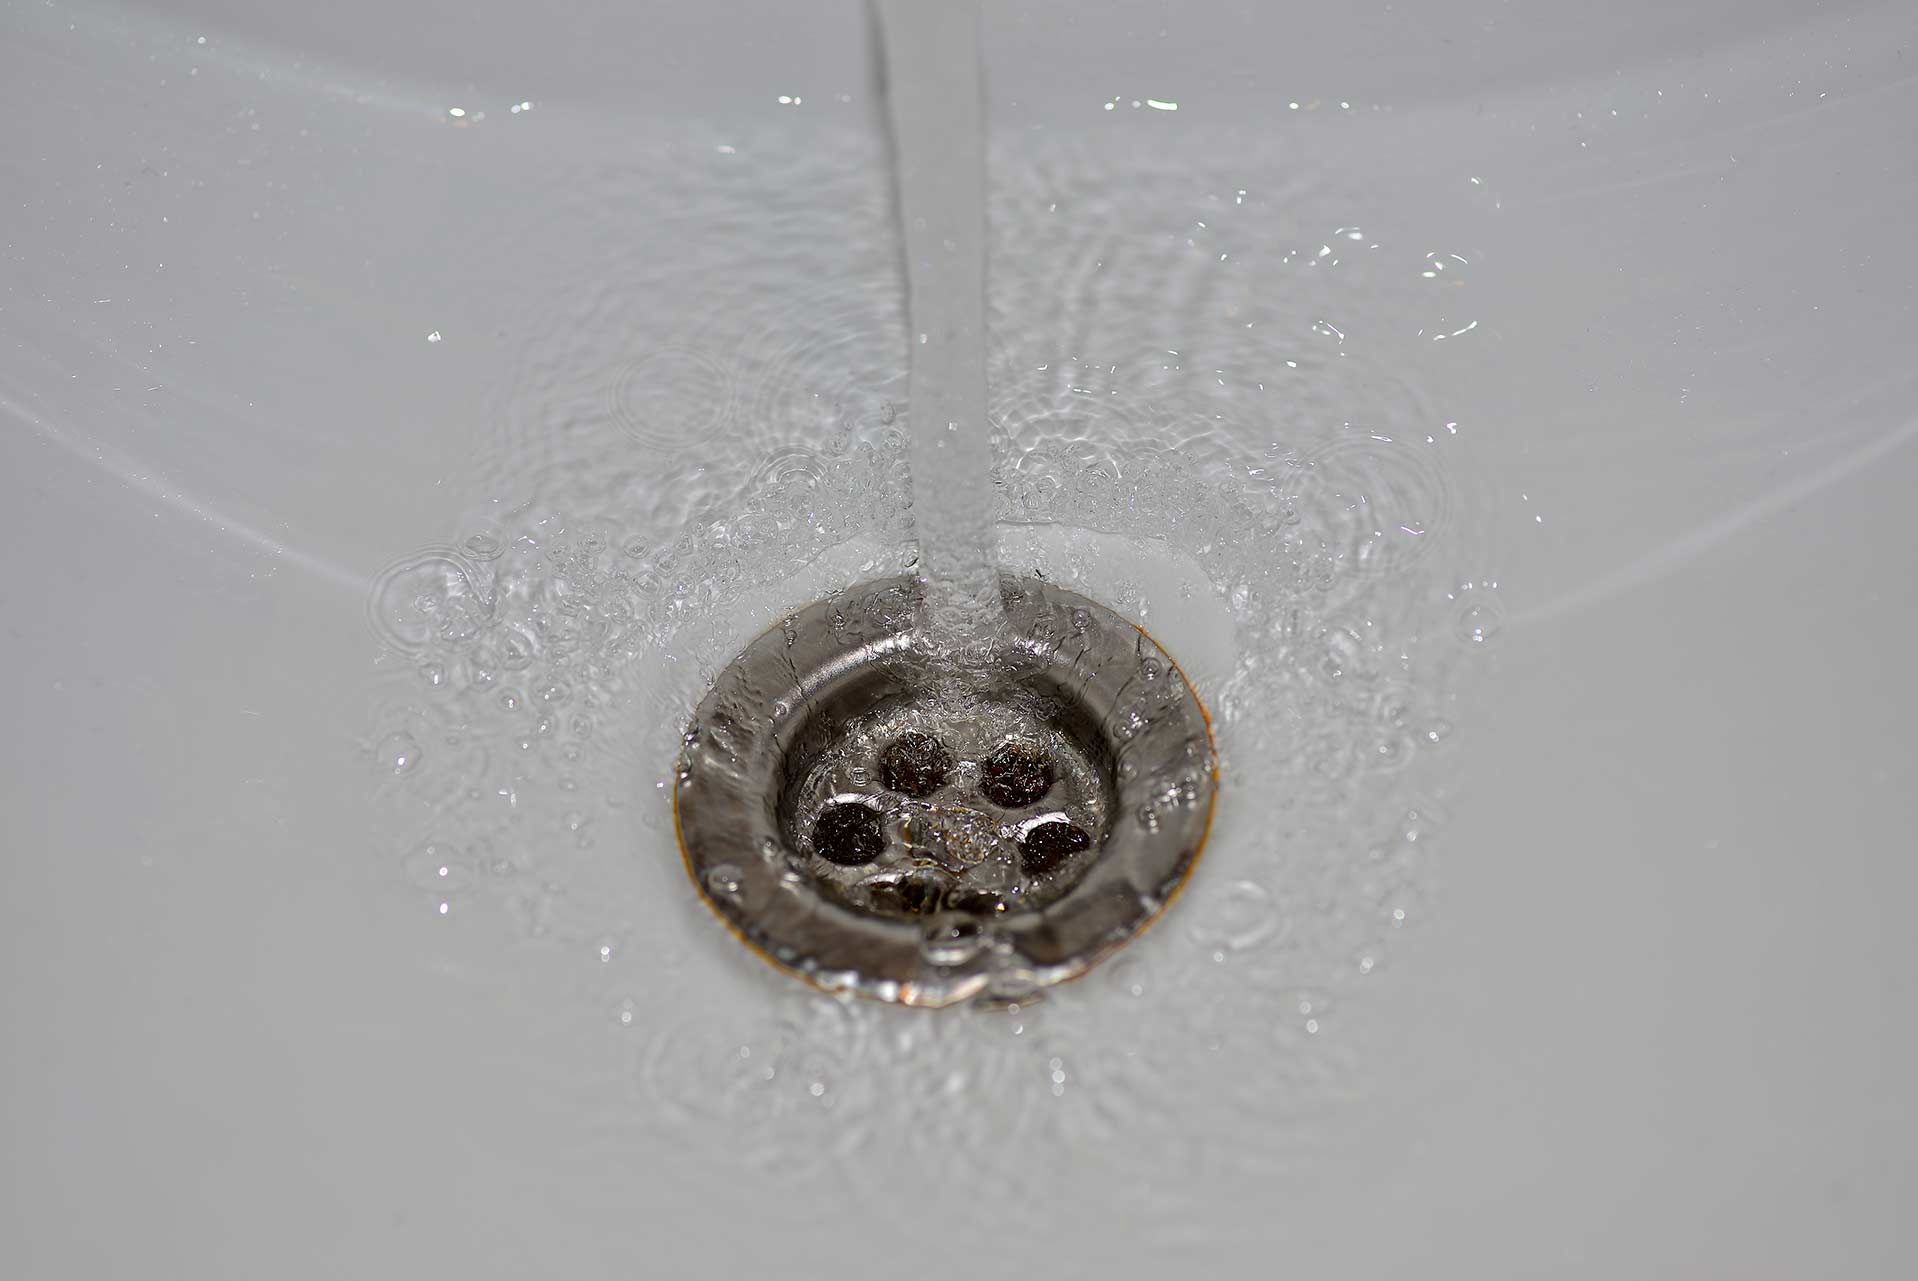 A2B Drains provides services to unblock blocked sinks and drains for properties in Knightsbridge.